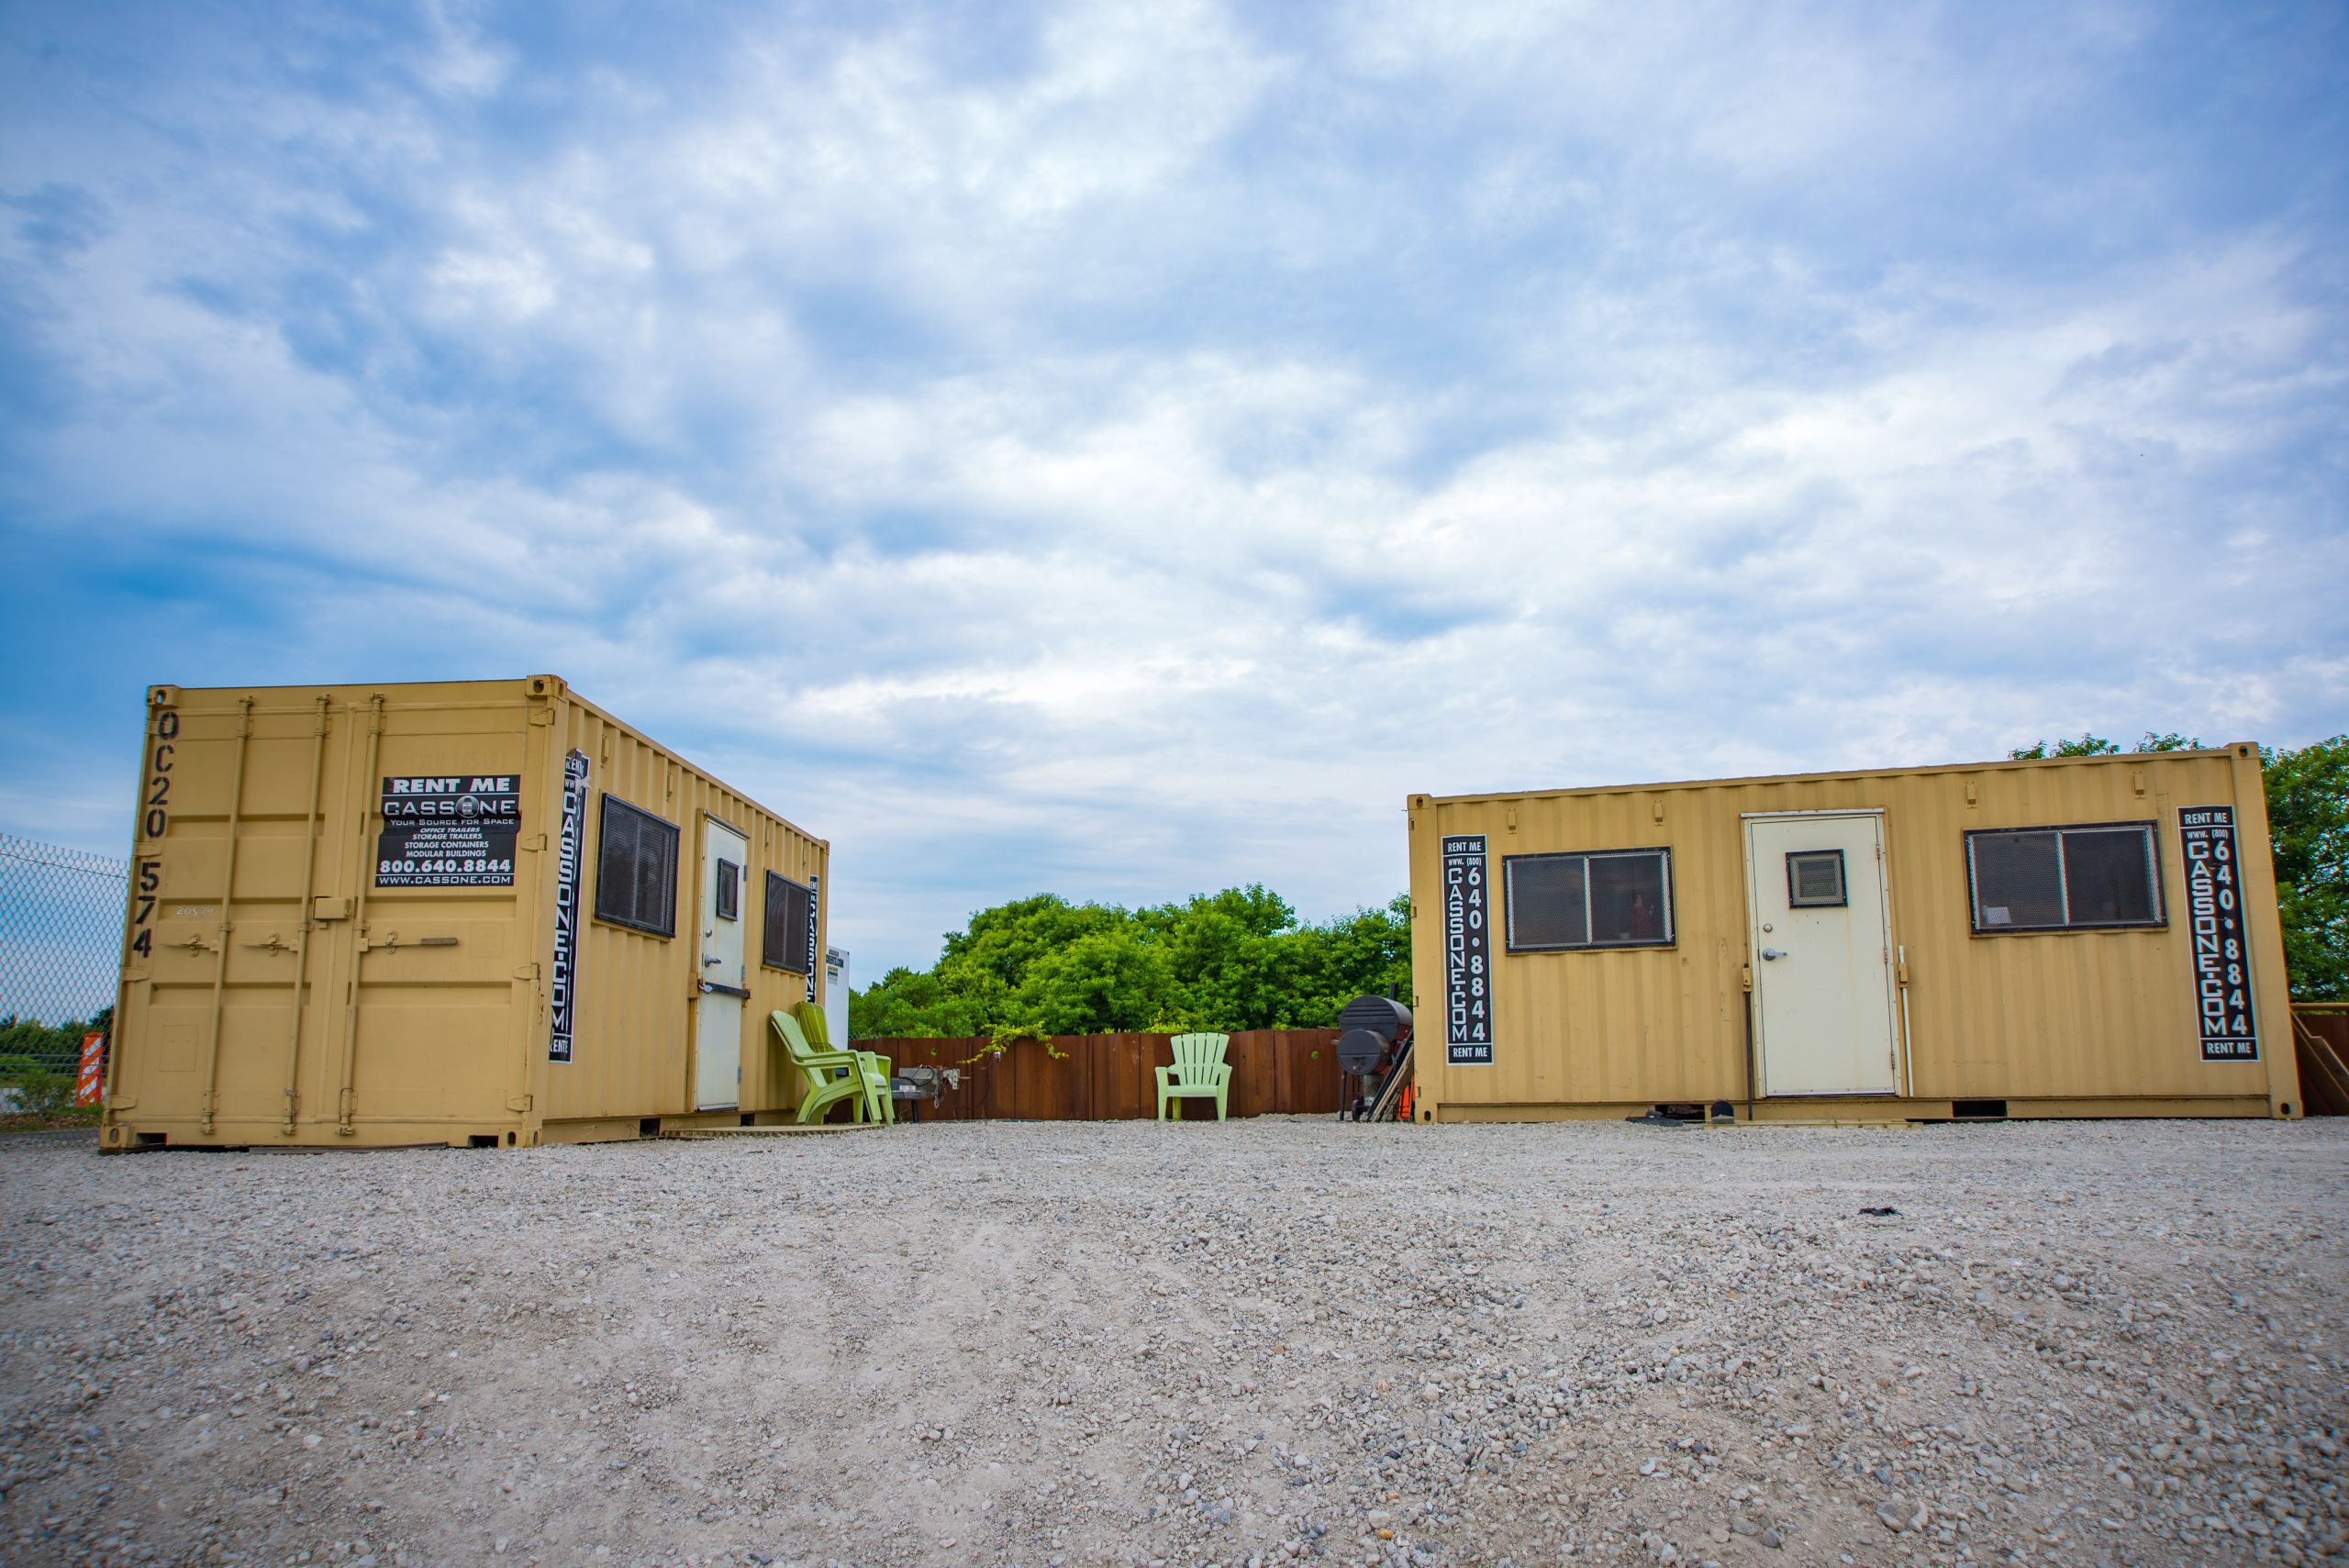 Storage Shed vs Shipping Container: Which One Should You Get?